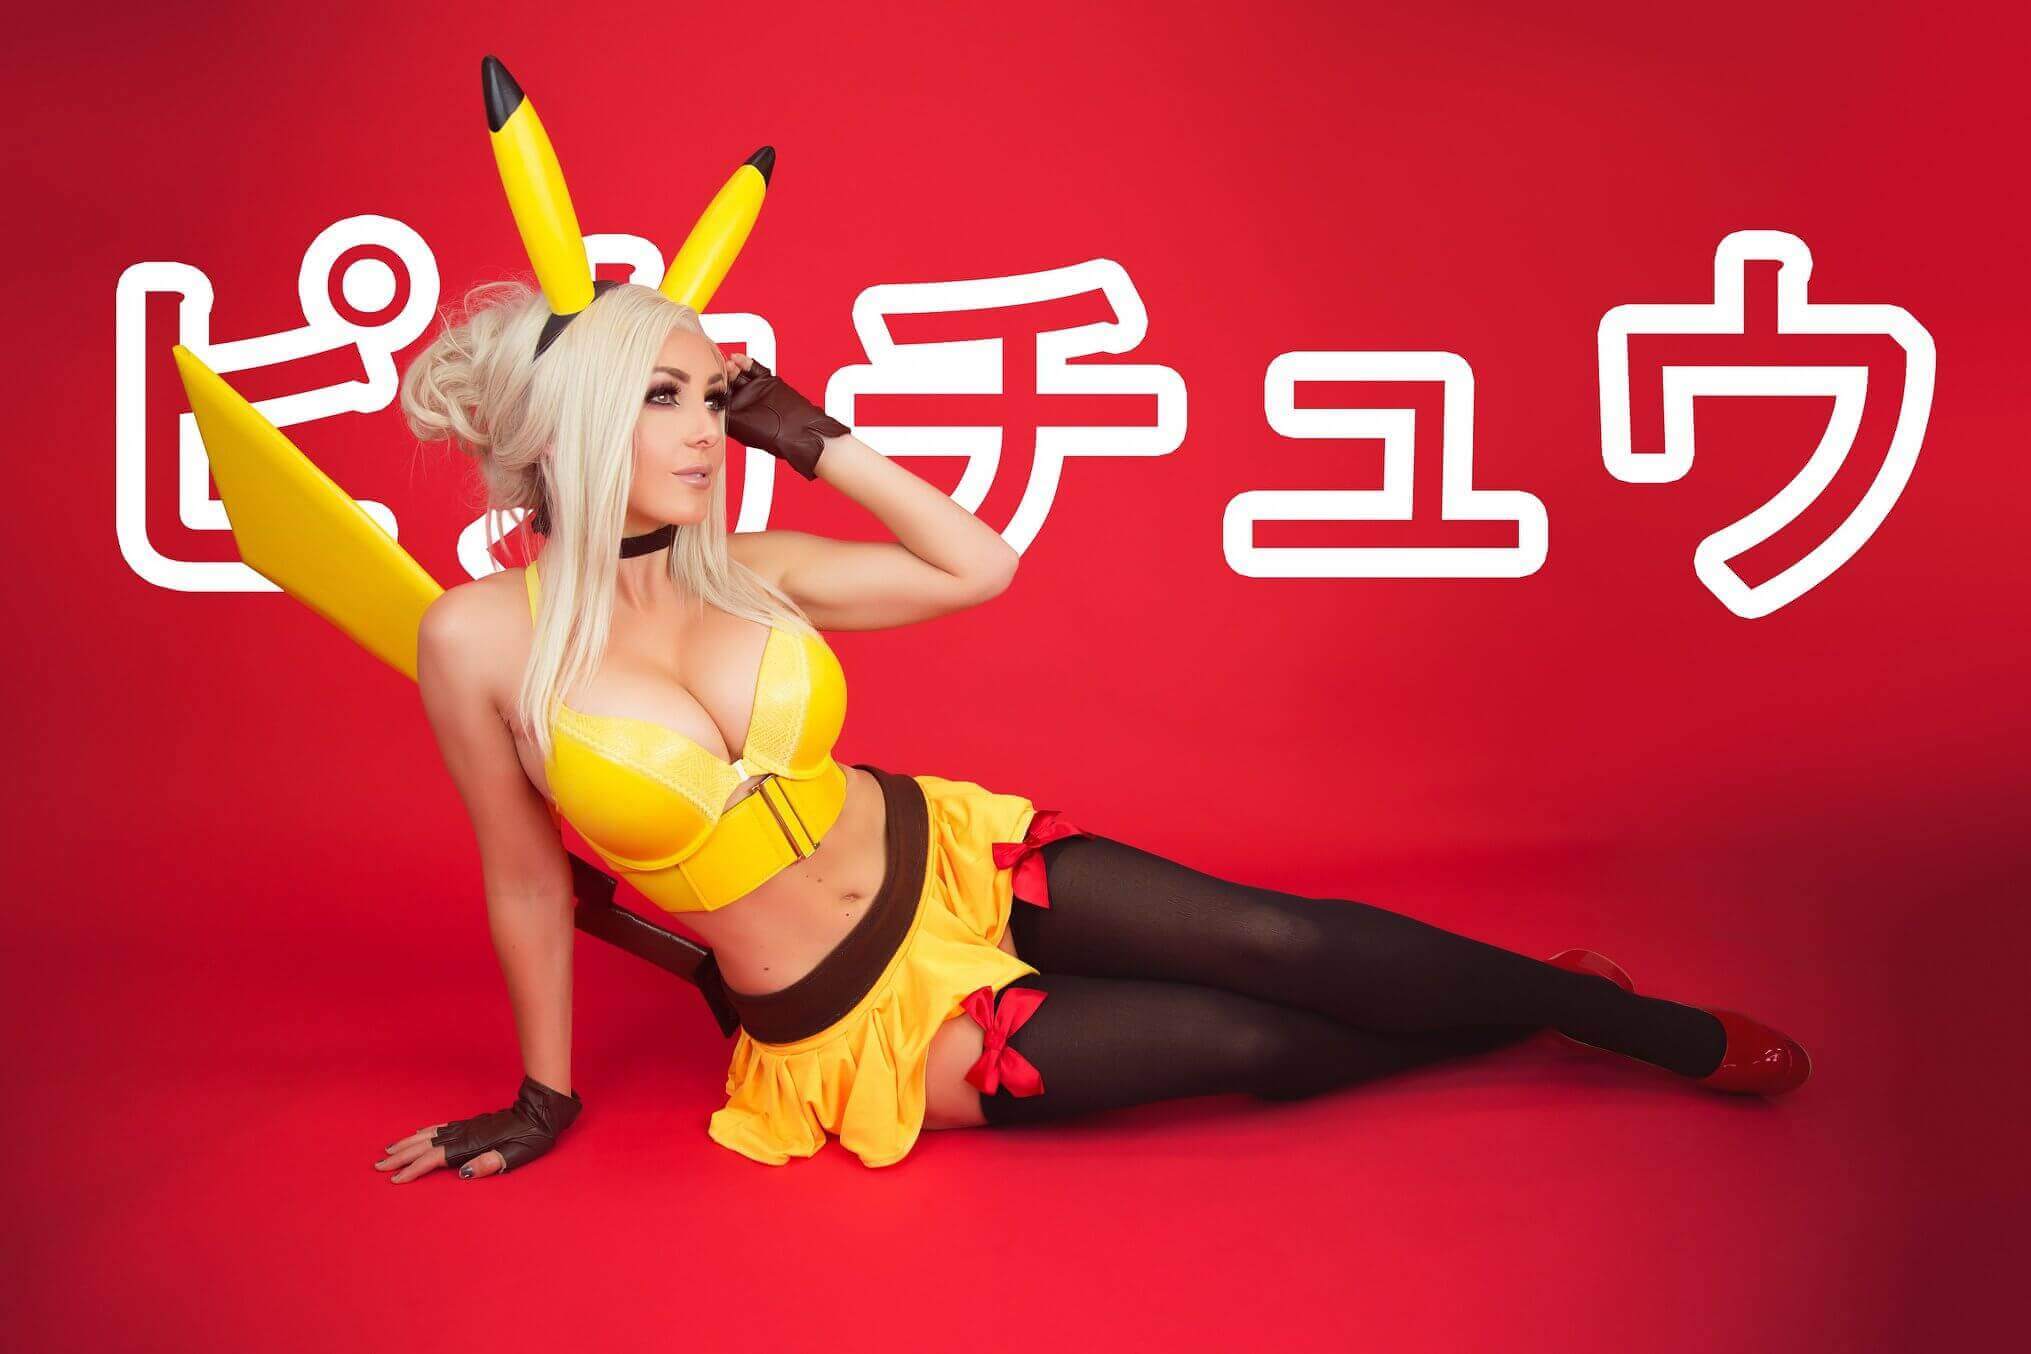 How much does jessica nigri make